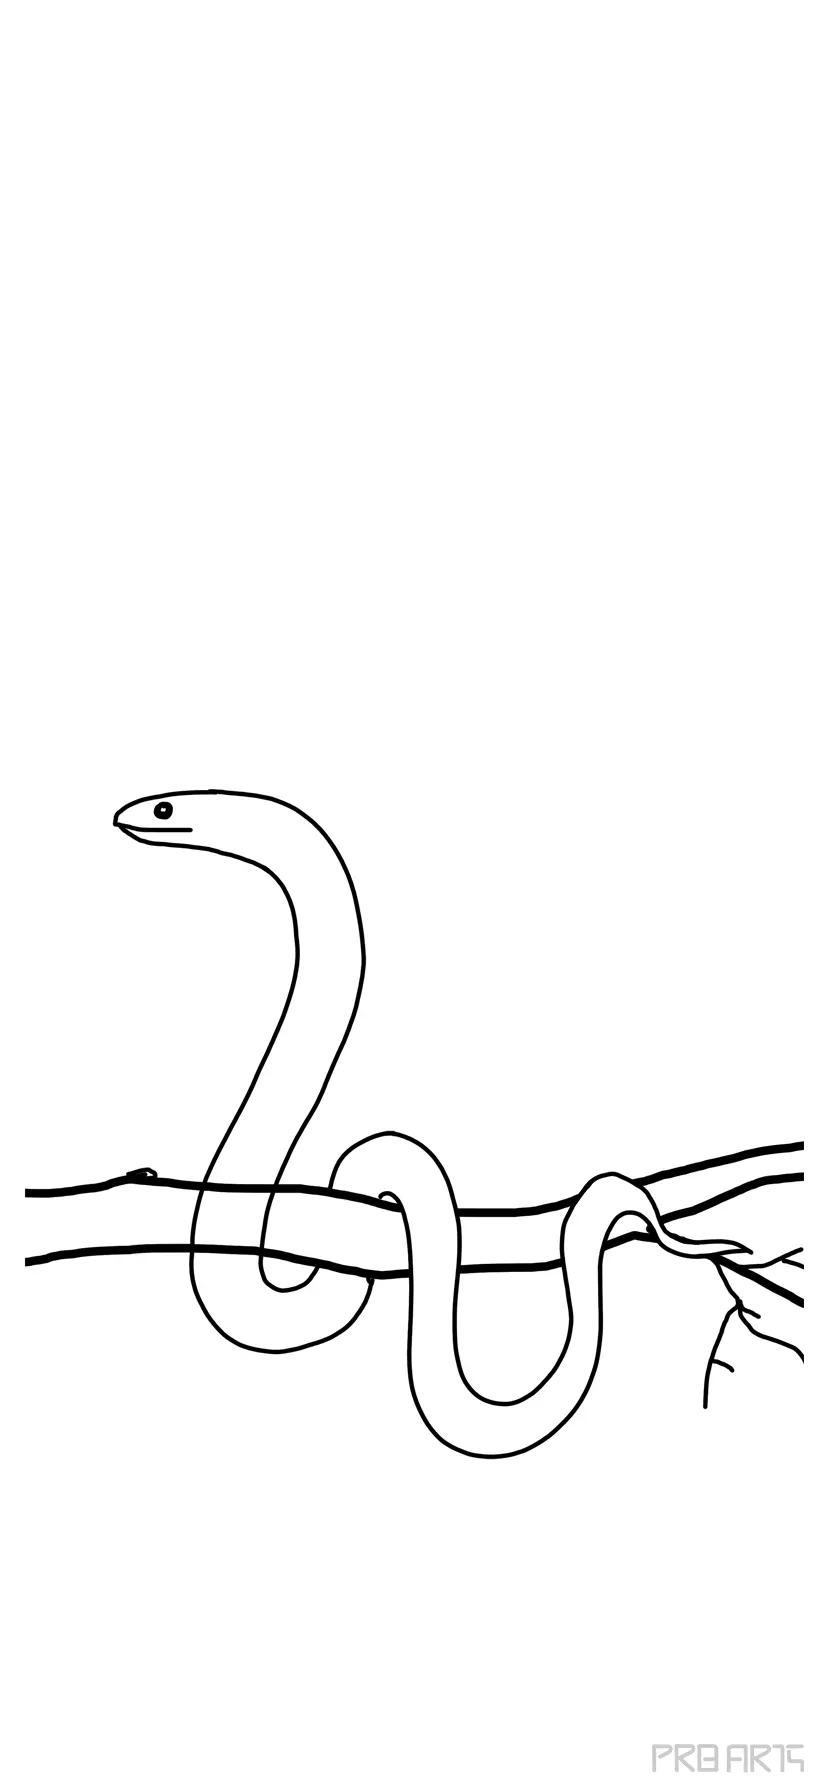 Heart and snake stock illustration Illustration of drawing  100437463